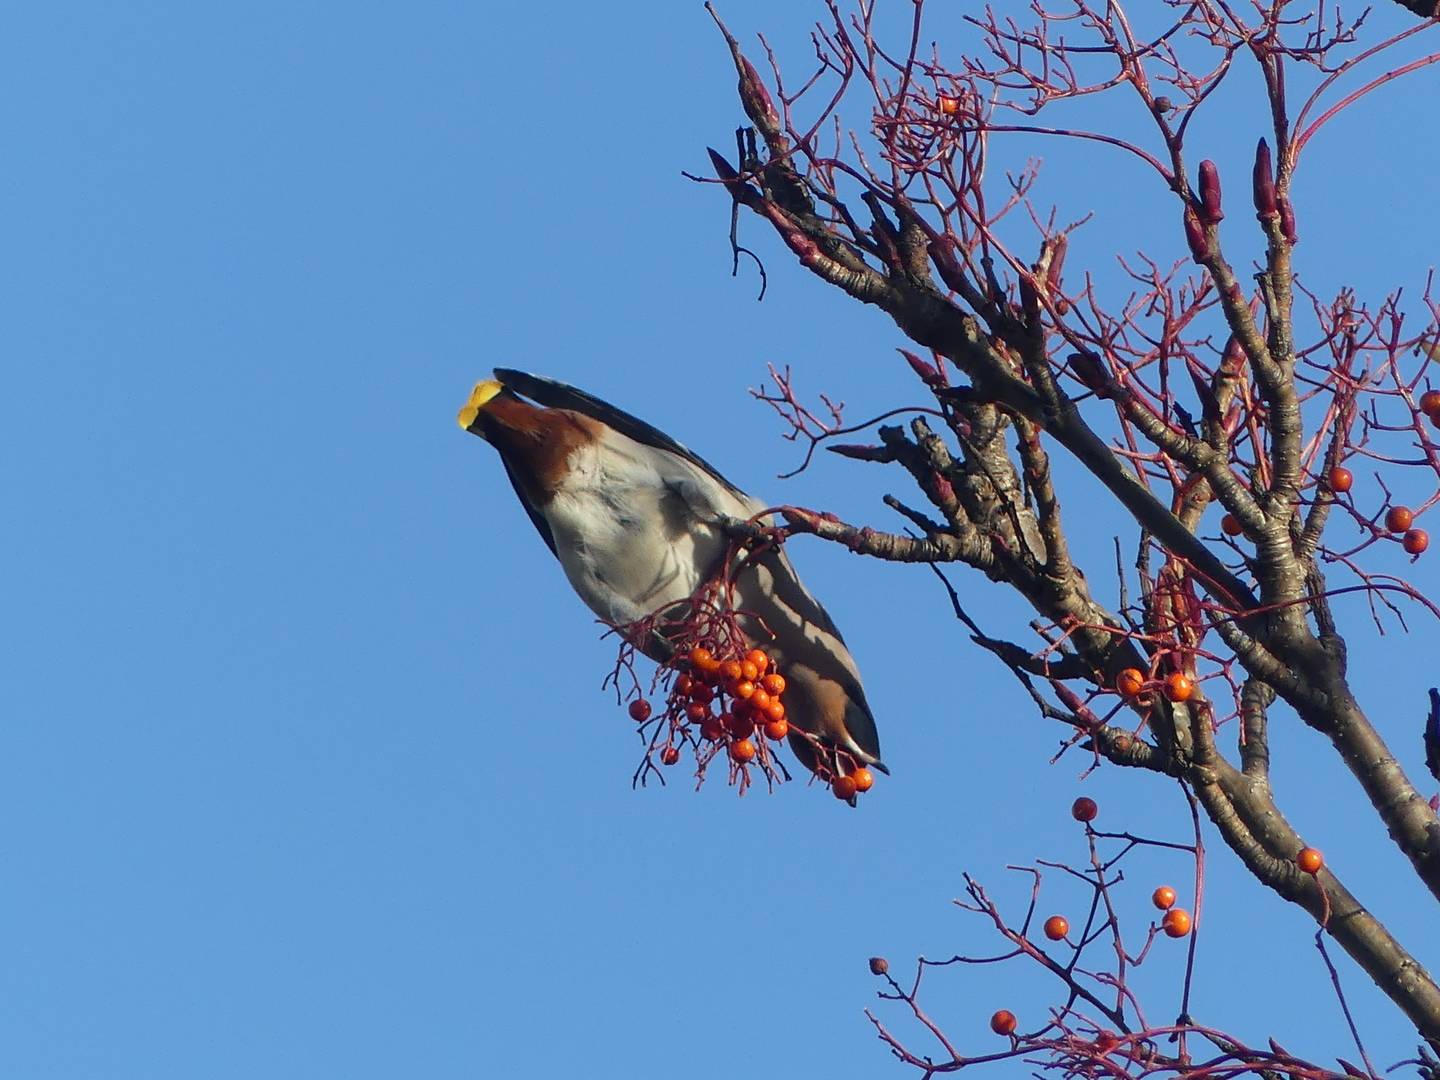 Bohemian Waxwing, Permission granted by photographer (tour guest)